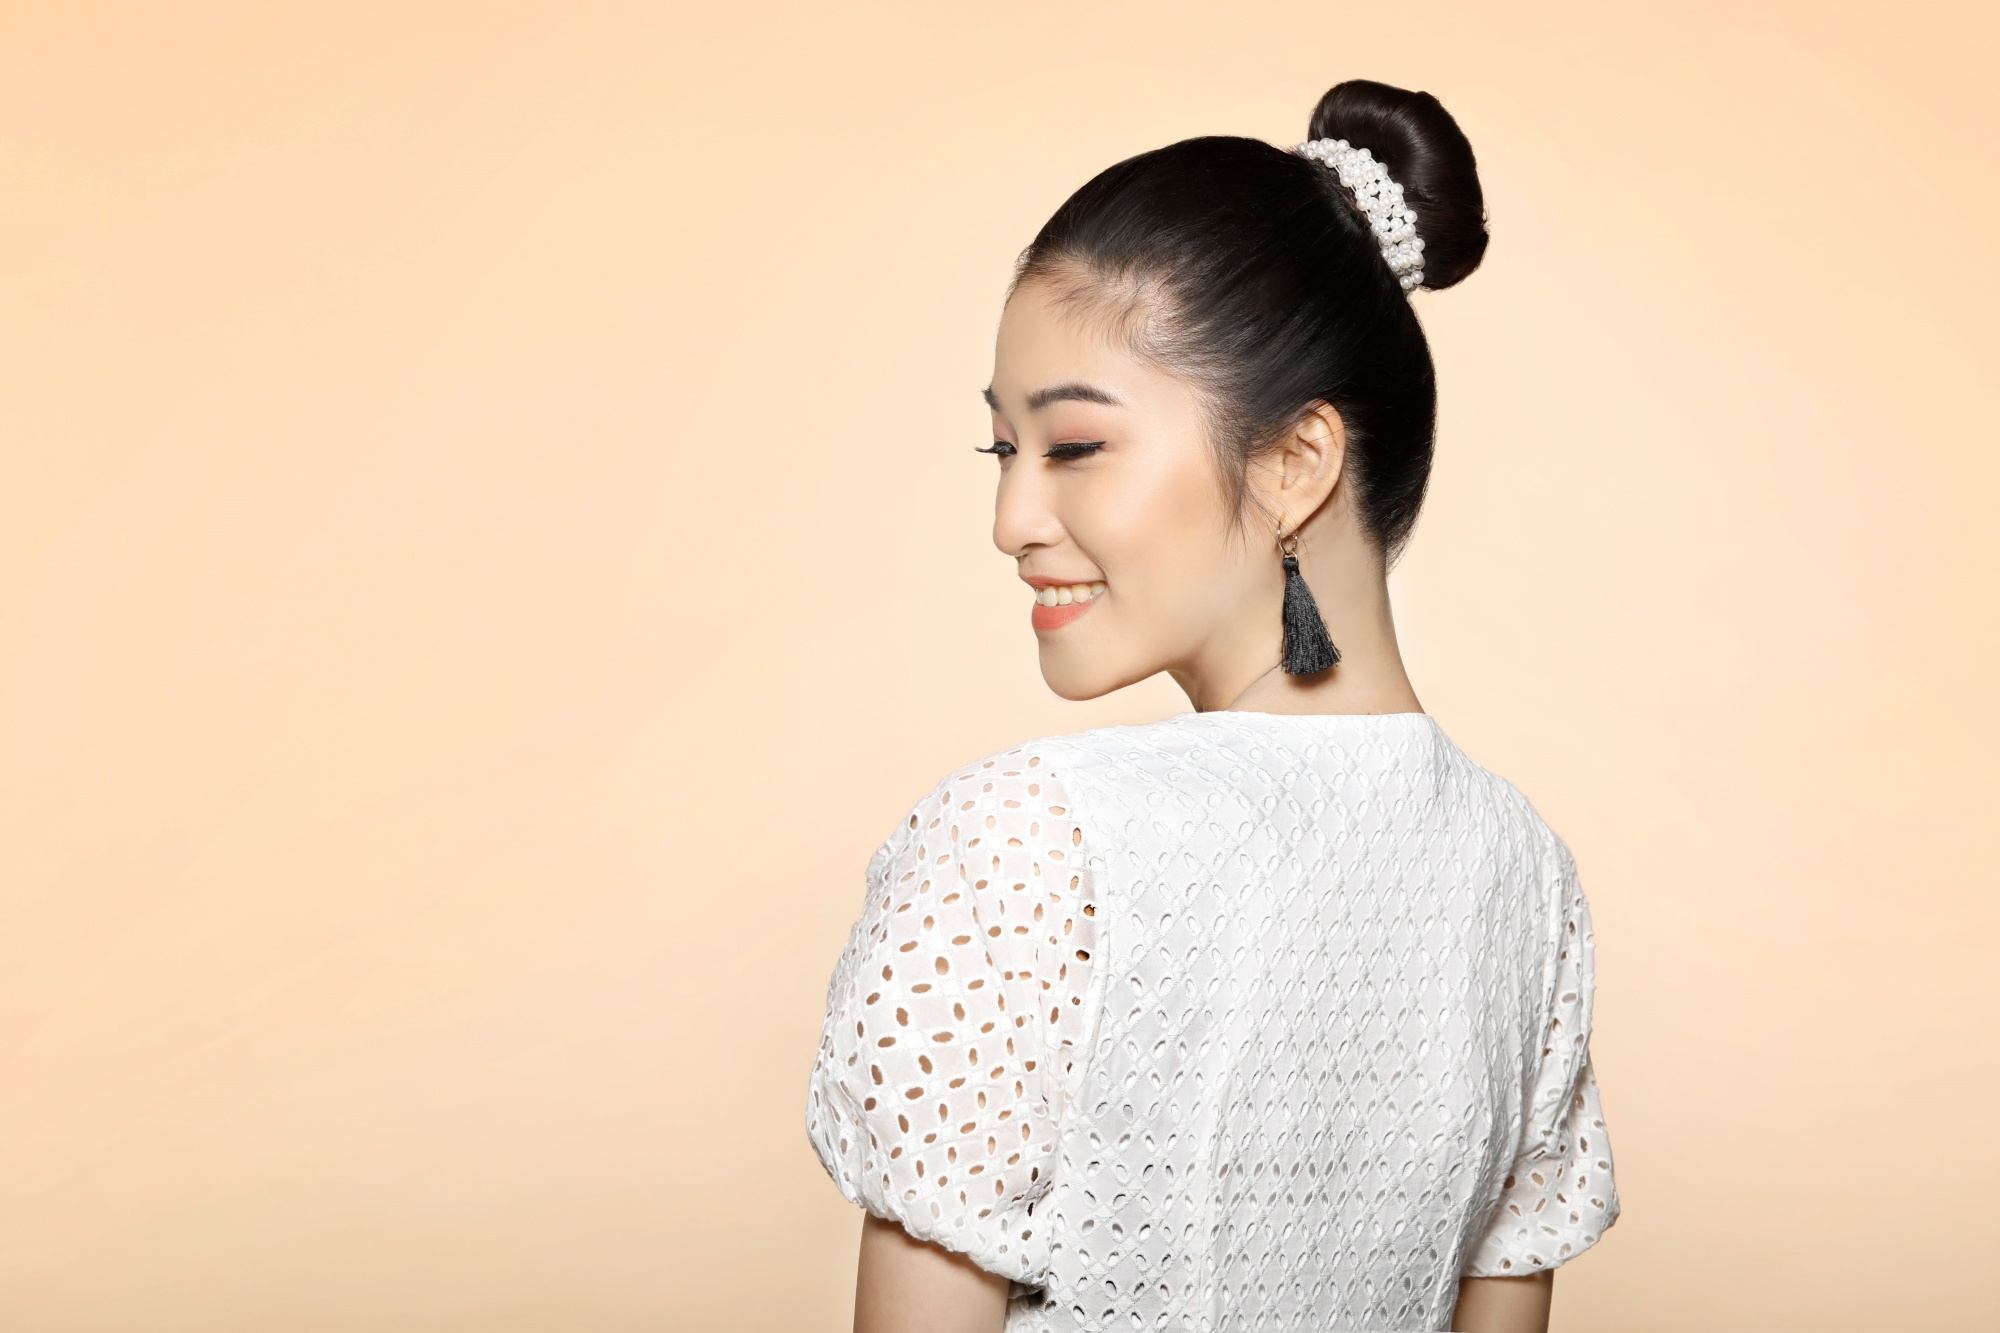 Valentine's Day: Asian woman with a ballerina bun wearing a white dress